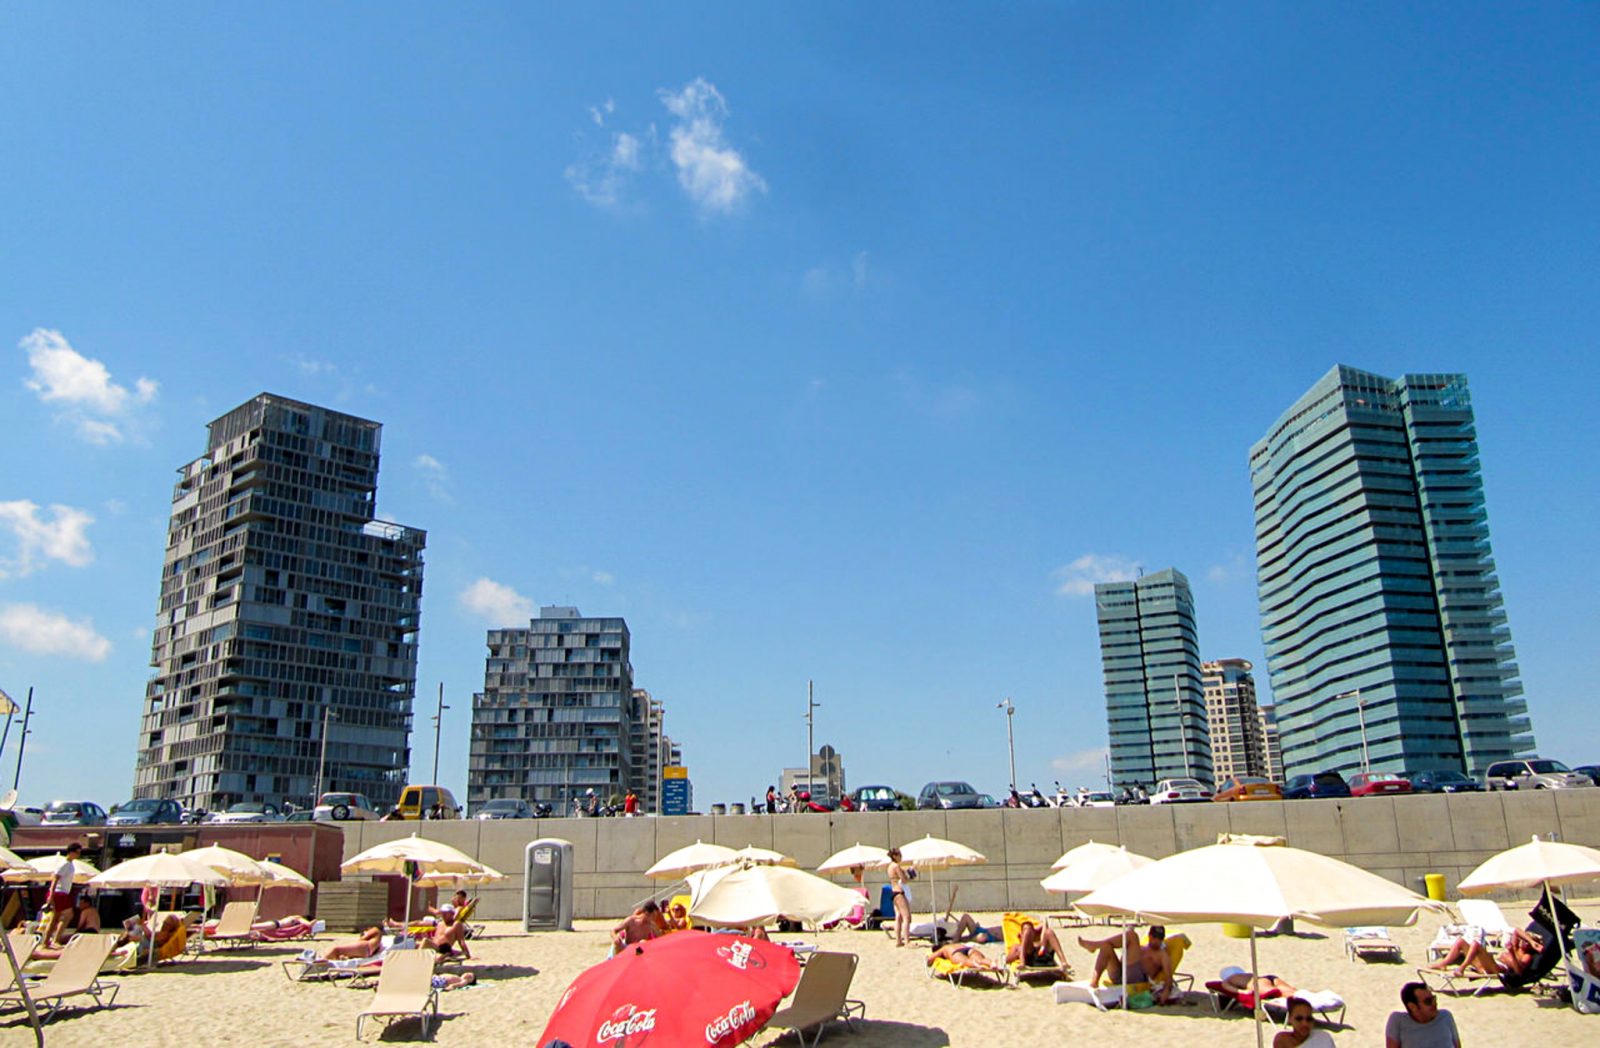 Llevant is the farthest sandy beach in Barcelona